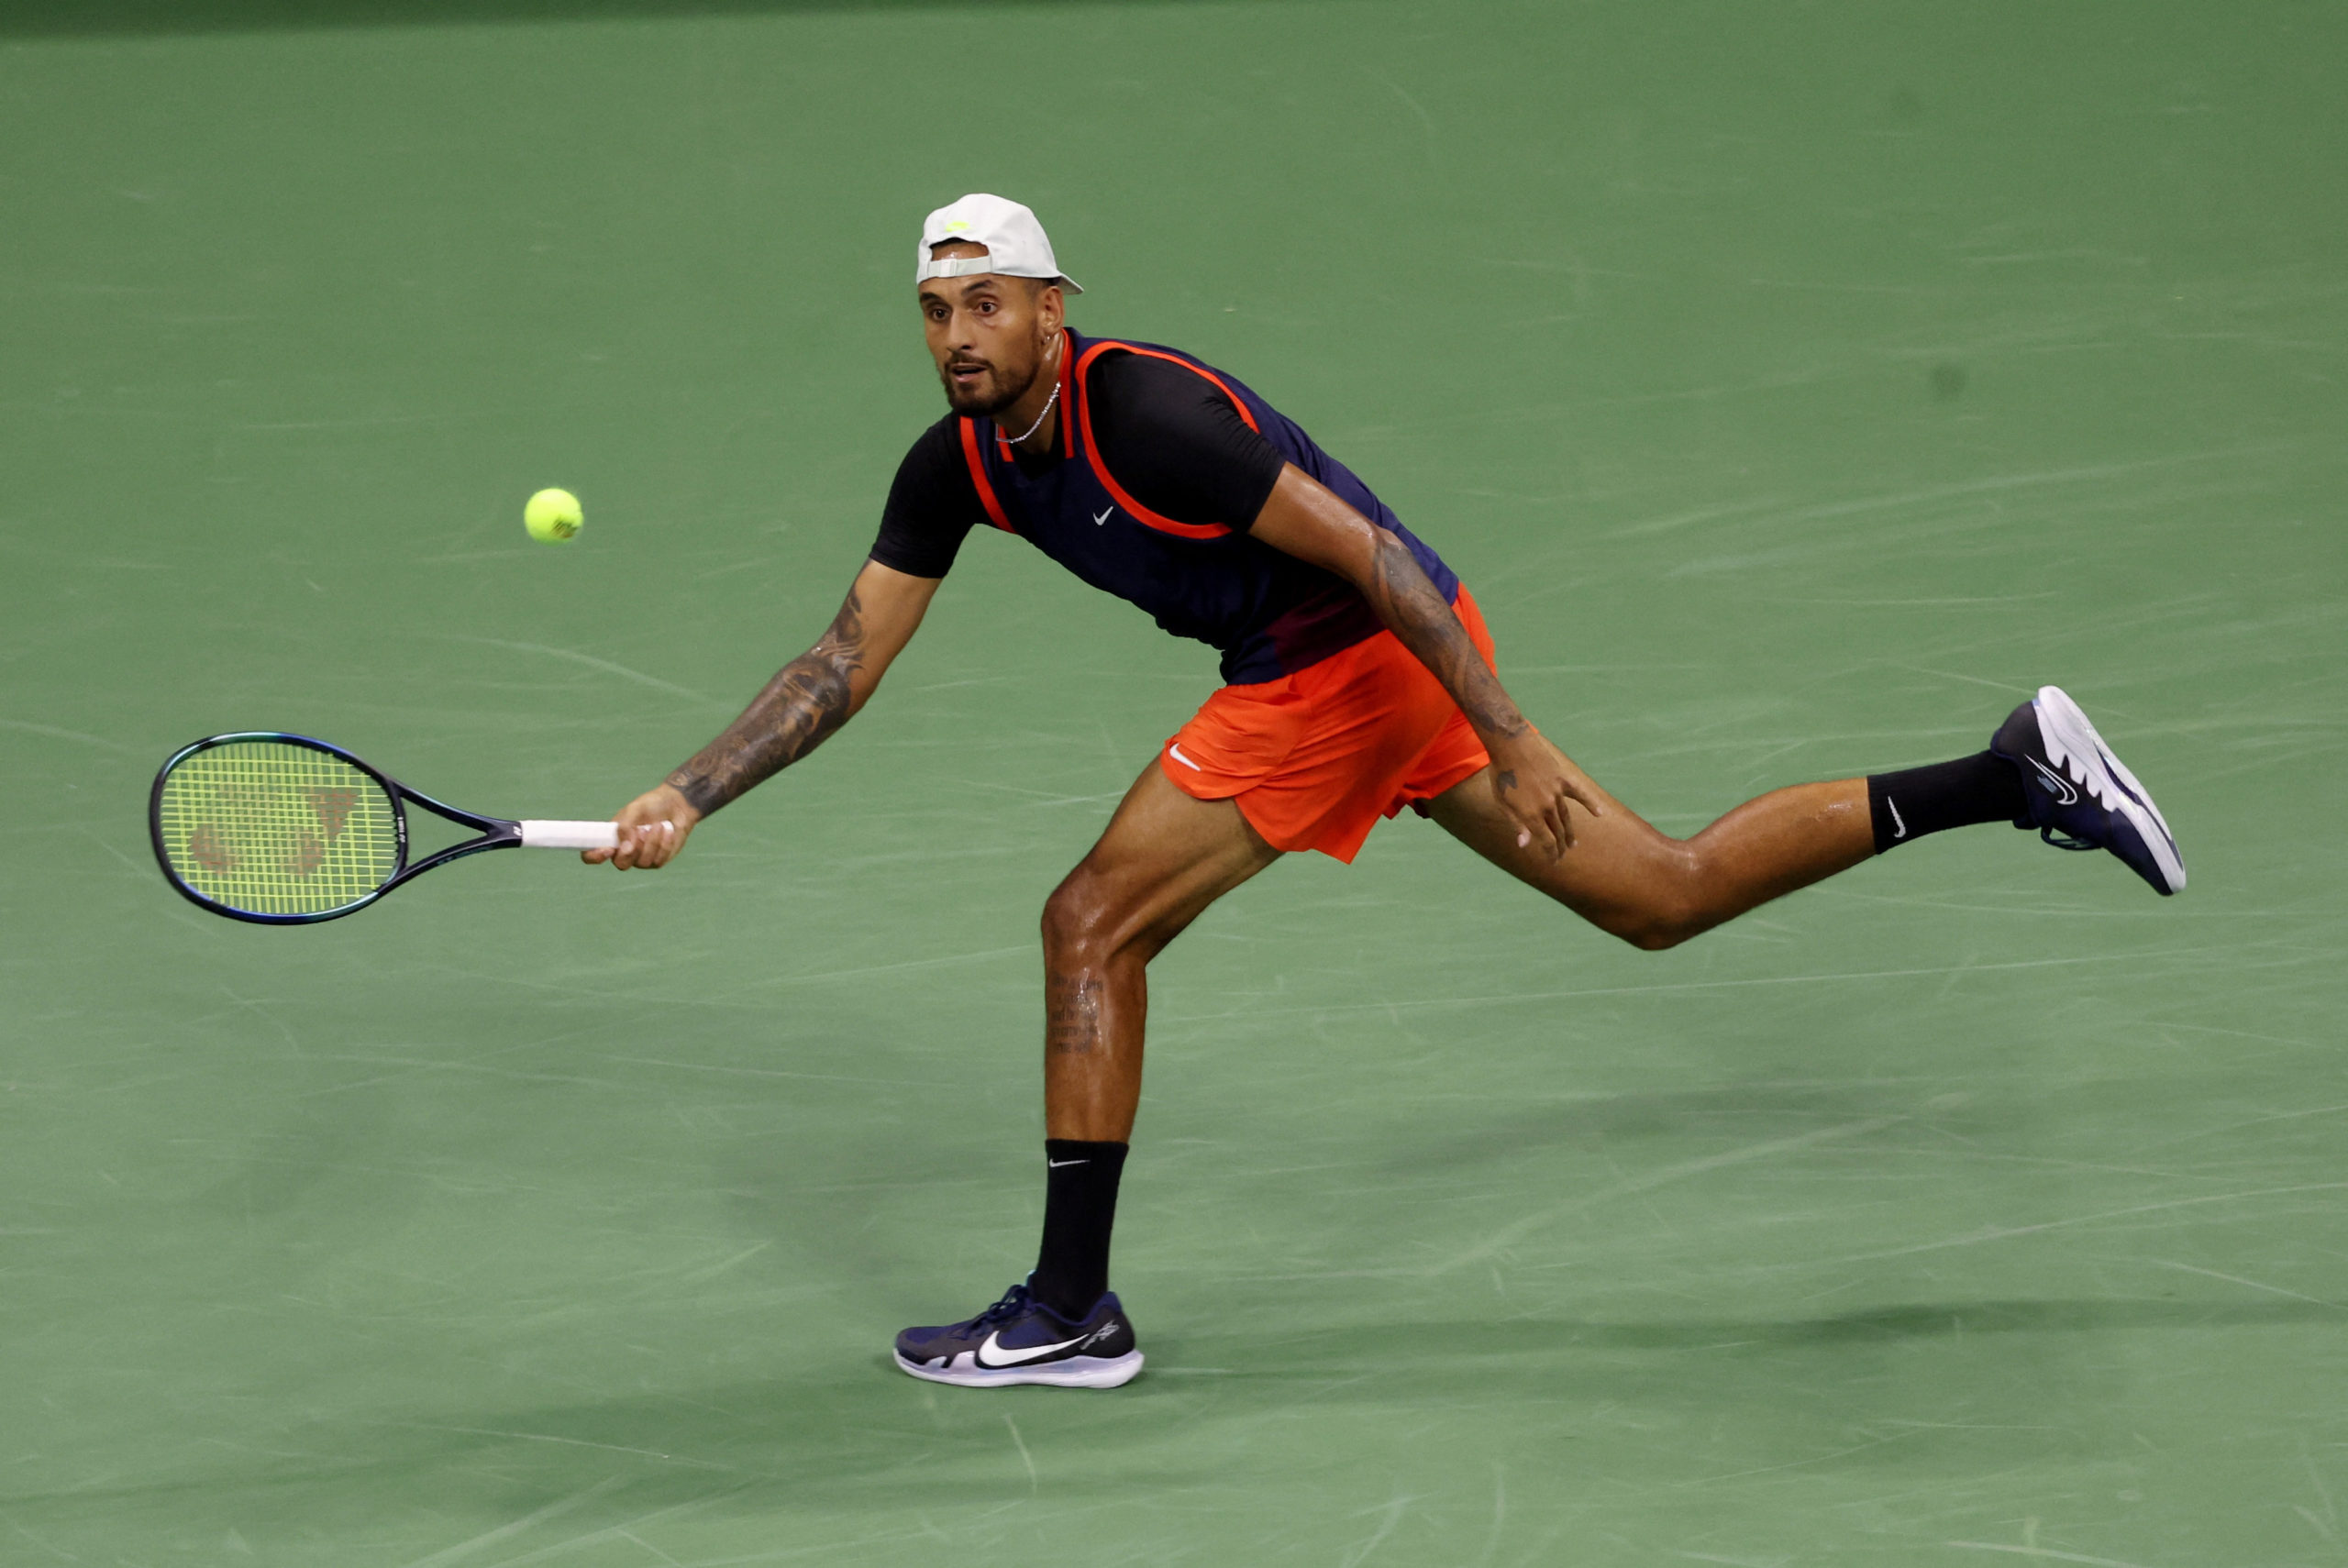 FILE PHOTO: Tennis - U.S. Open - Flushing Meadows, New York, United States - August 29, 2022 Australia's Nick Kyrgios in action during his first round match against Australia's Thanasi Kokkinakis